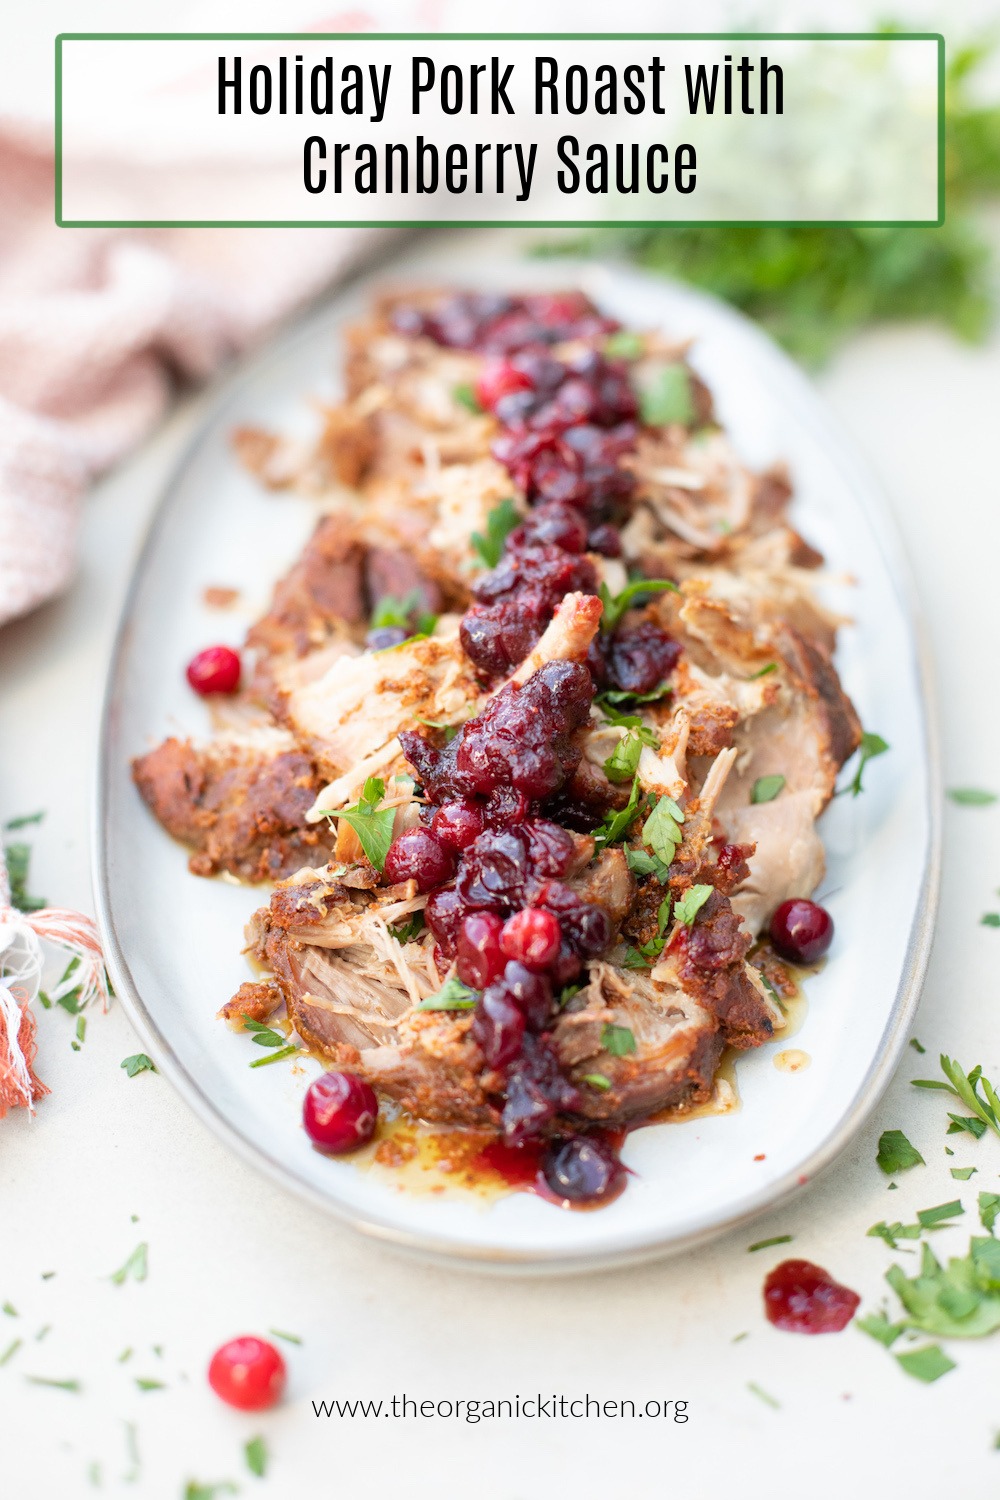 Holiday Pork Roast with Cranberry Sauce on a grey plate and garnished with parsley